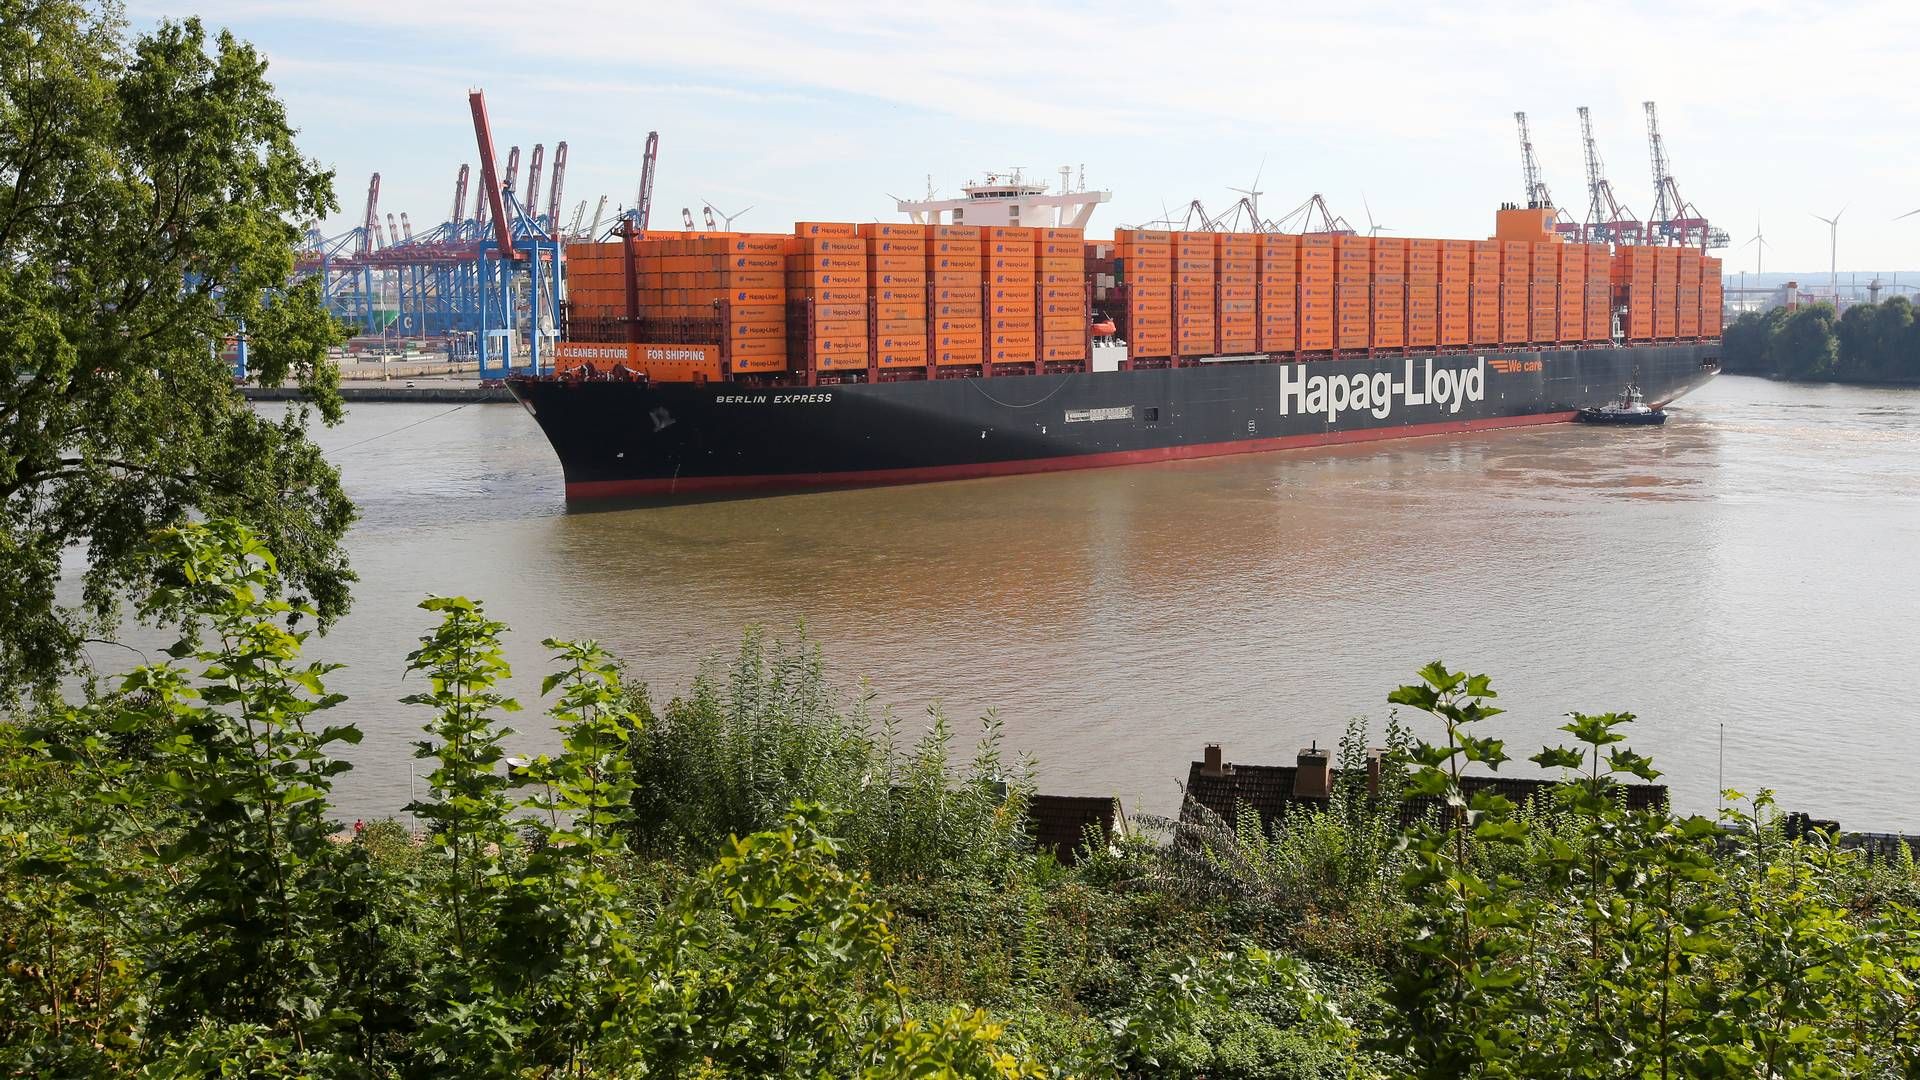 "We will have higher productivity in the terminals, and as such, that may allow us to sail a little bit slower and as such also reduce emissions," Hapag-Lloyd CEO Rolf Habben Jansen said on Wednesday about the potential of the upcoming collaboration with Maersk. | Photo: Bodo Marks/AP/Ritzau Scanpix